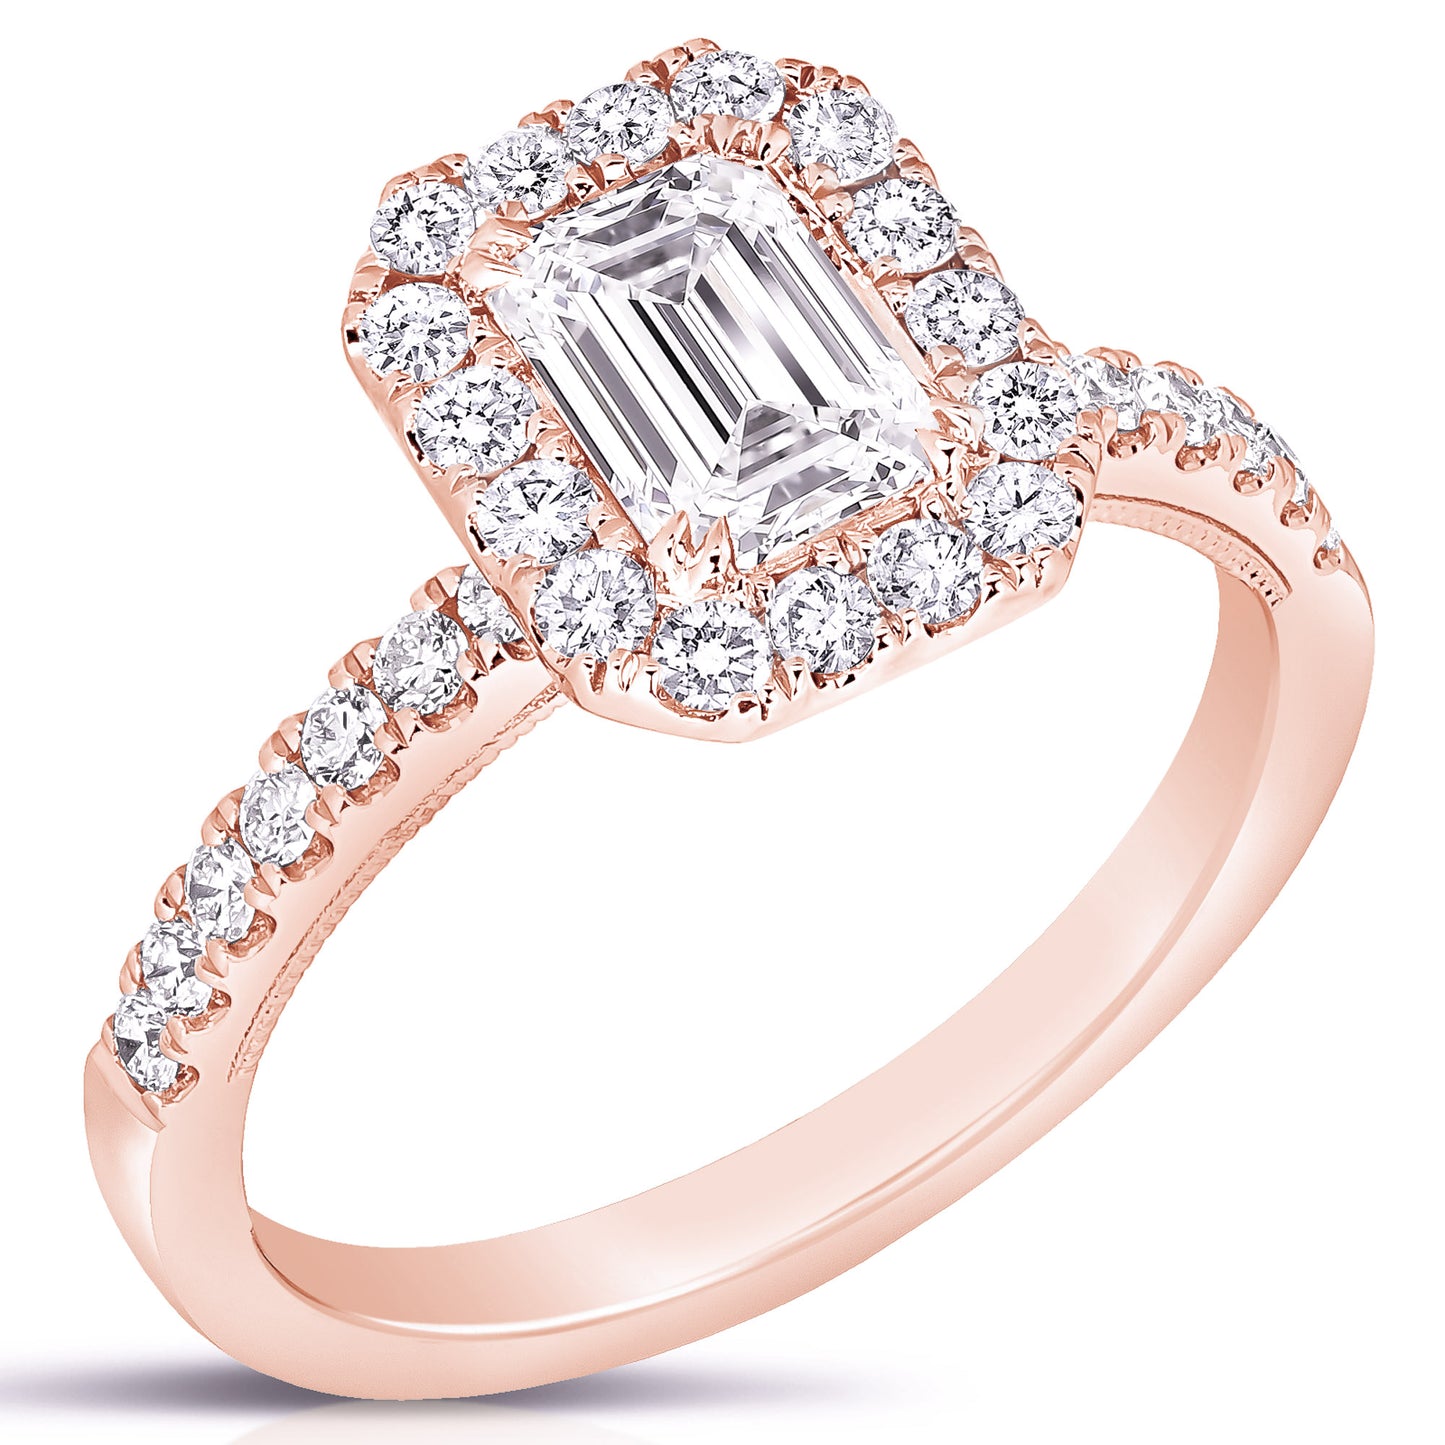 1 1/2 CT CENTER EMERALD CUT HALO LAB GROWN ENGAGEMENT RING